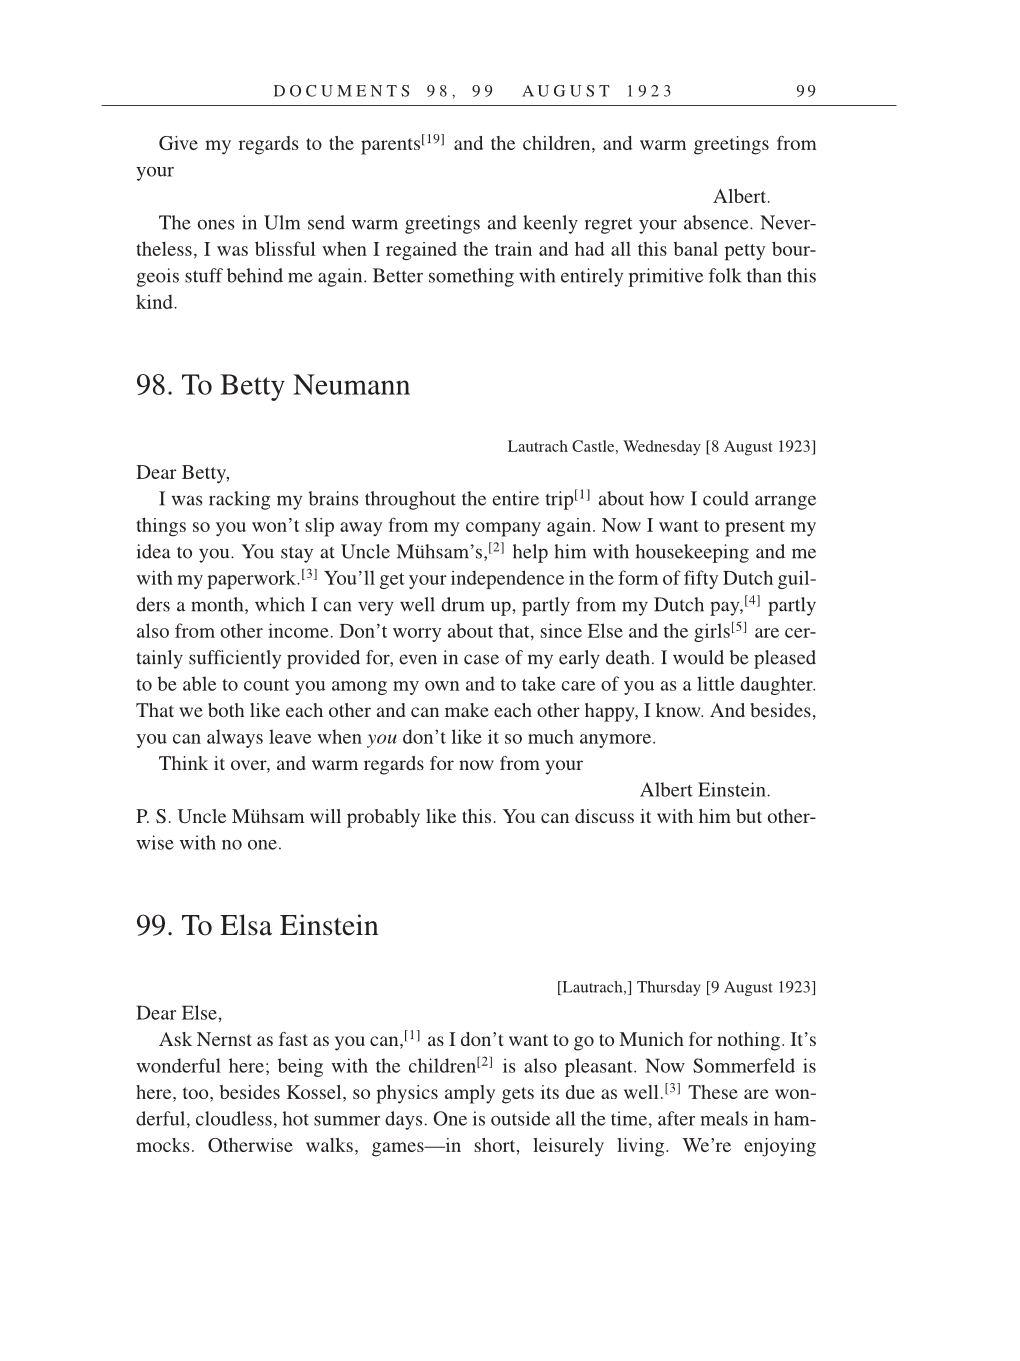 Volume 14: The Berlin Years: Writings & Correspondence, April 1923-May 1925 (English Translation Supplement) page 99